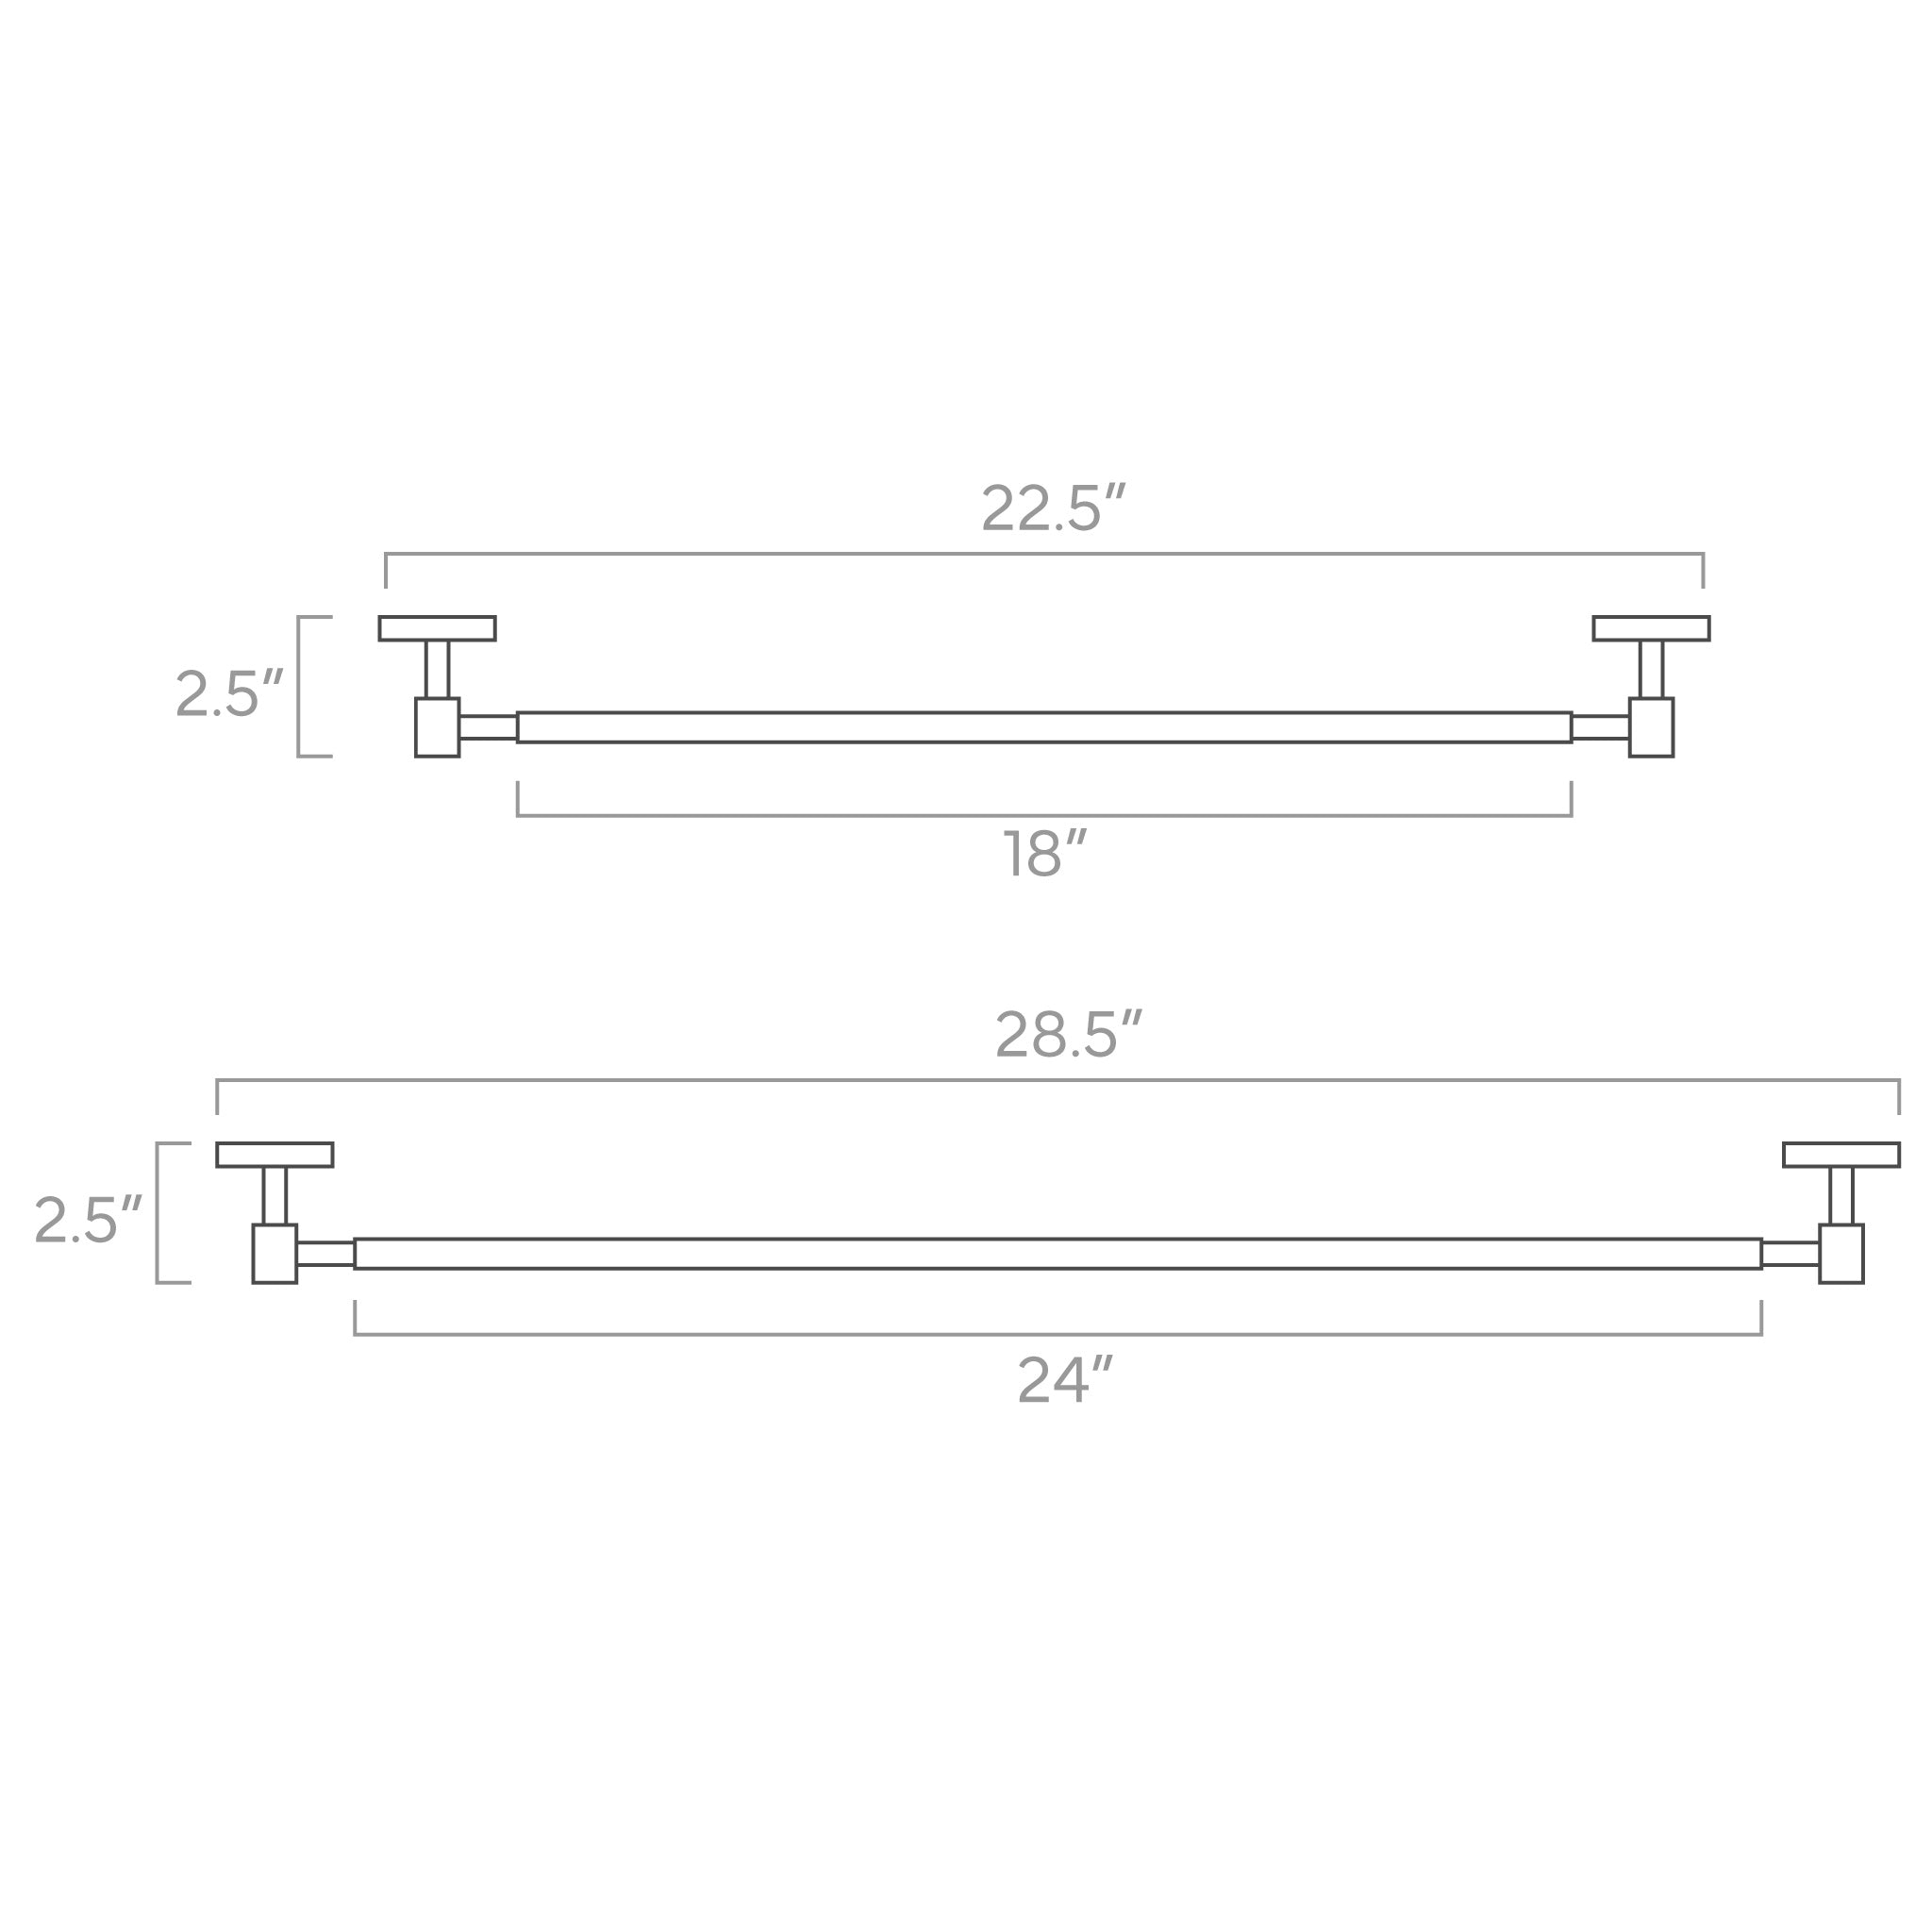 head towel bar ISO drawing, dutton brown hardware